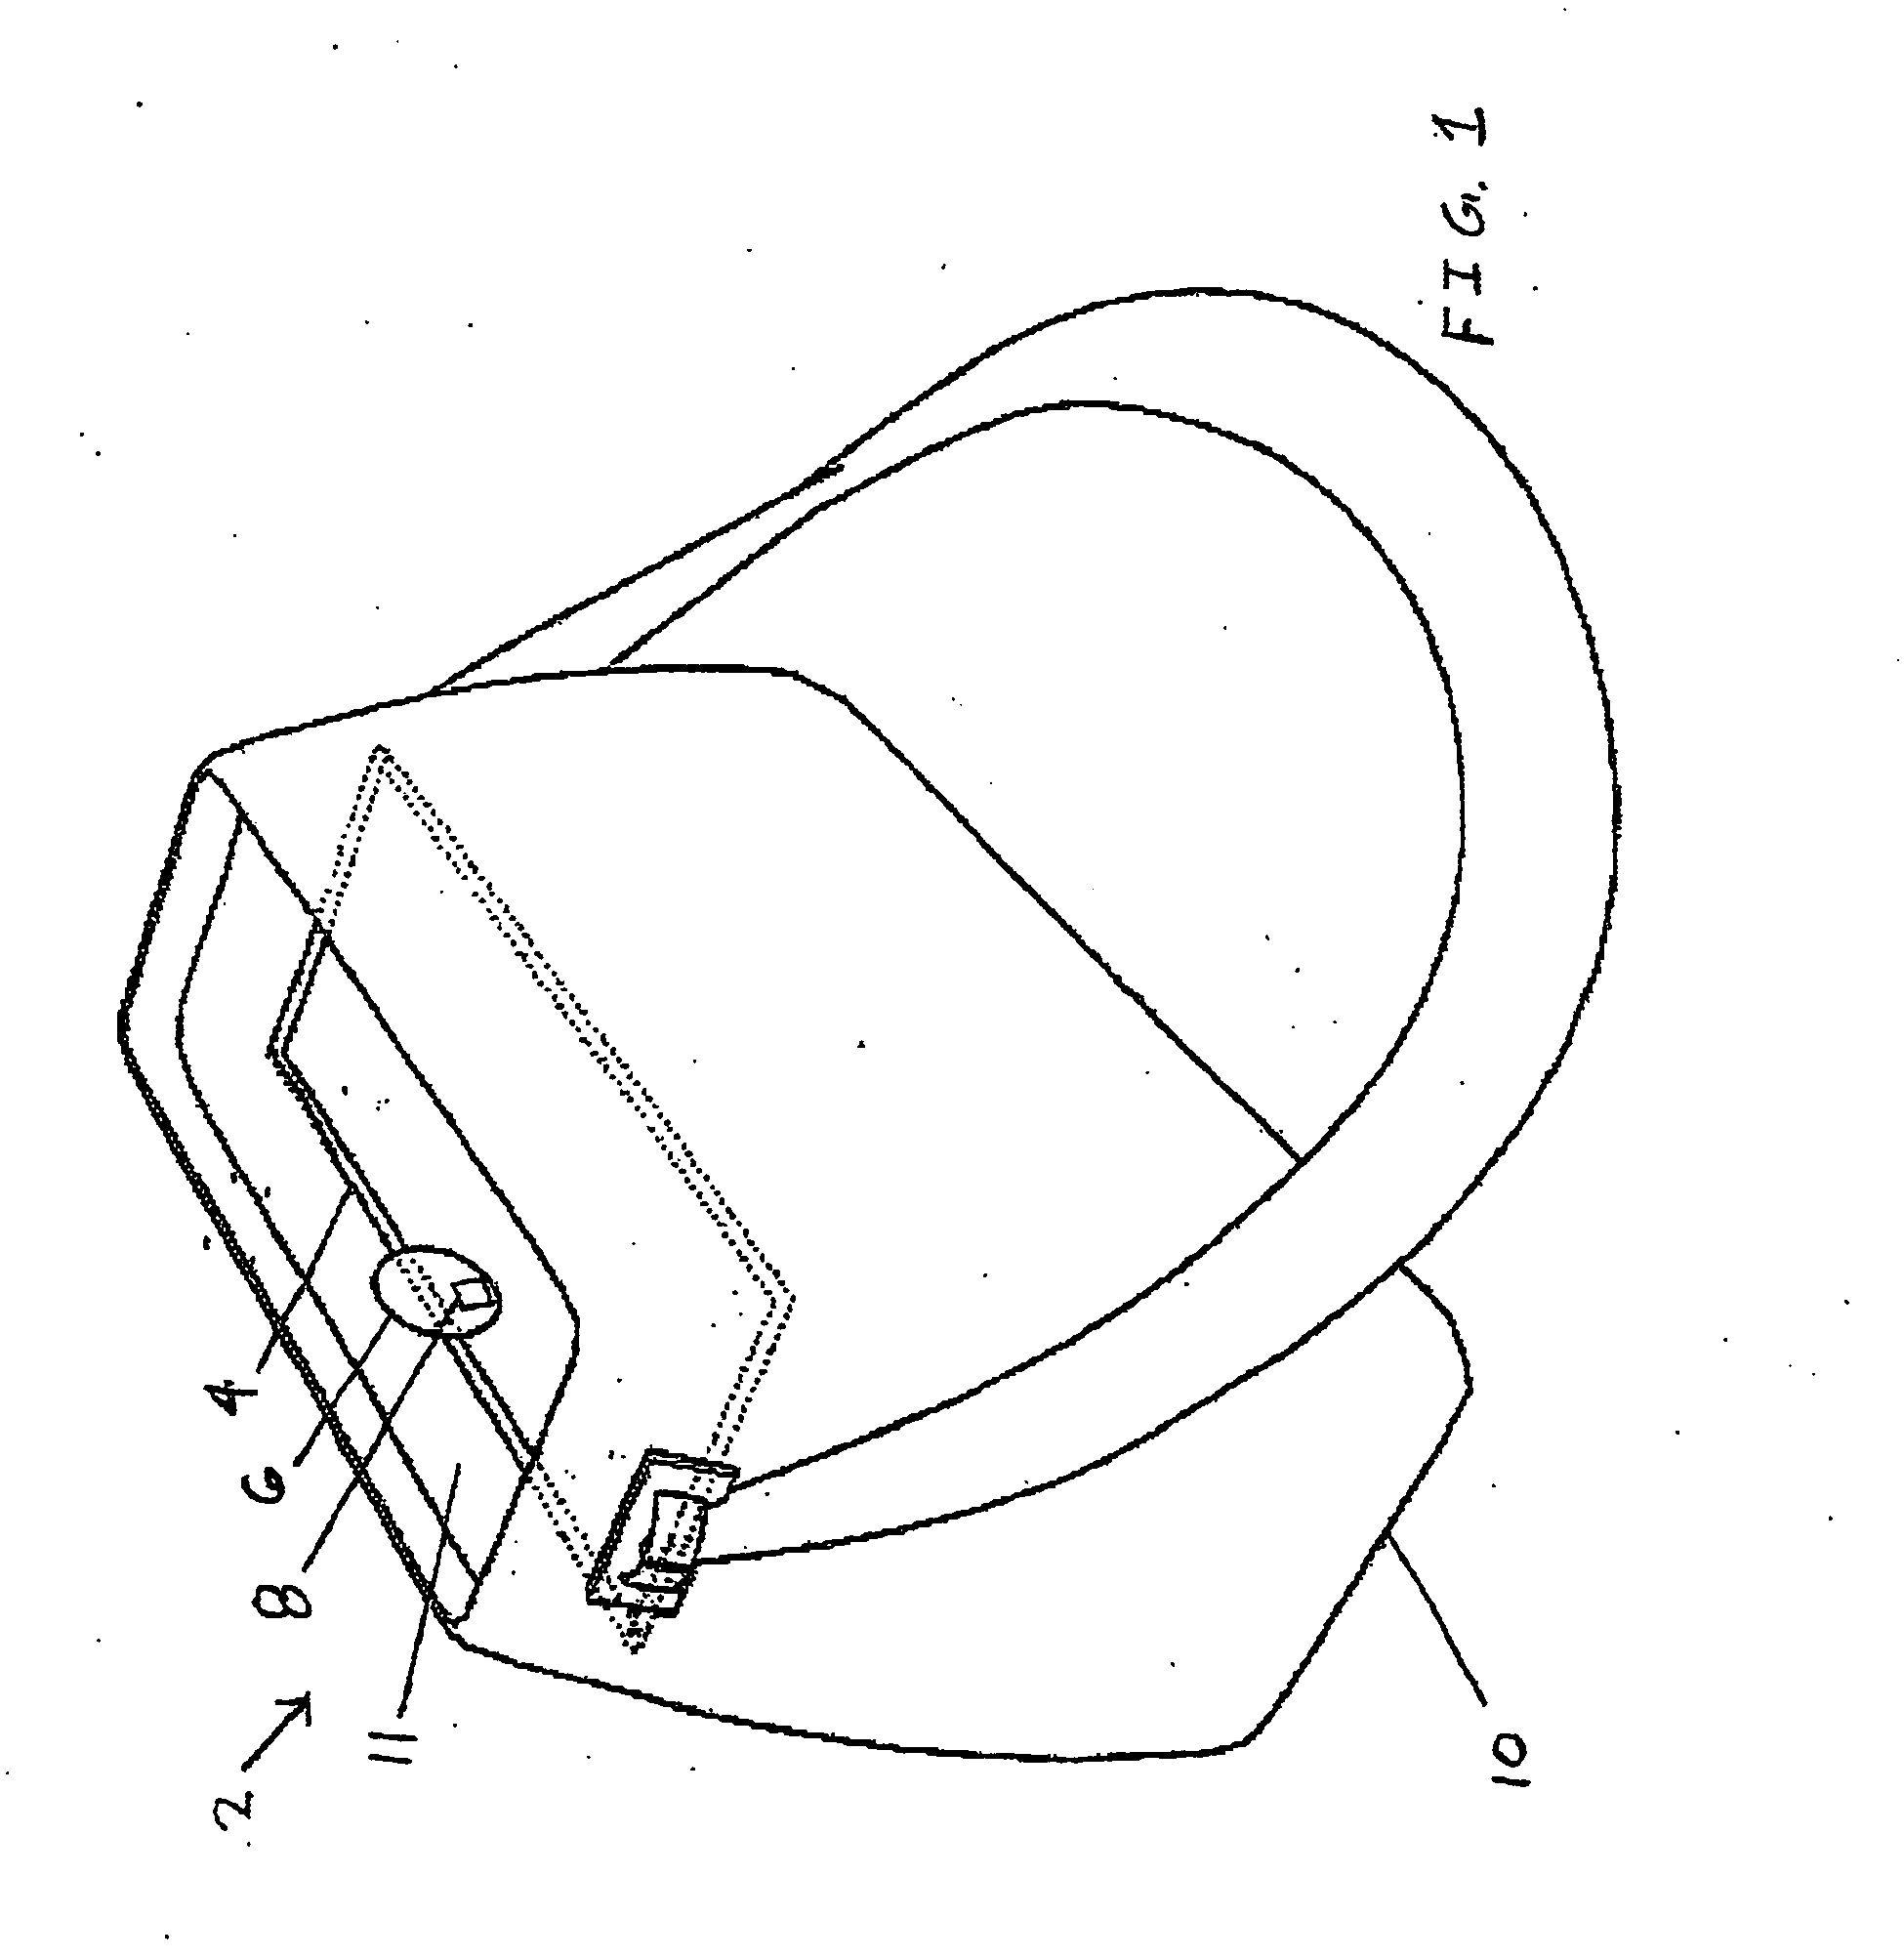 Lighting system for an interior of a clothing accessory or an article of clothing and a method of manufacture thereof